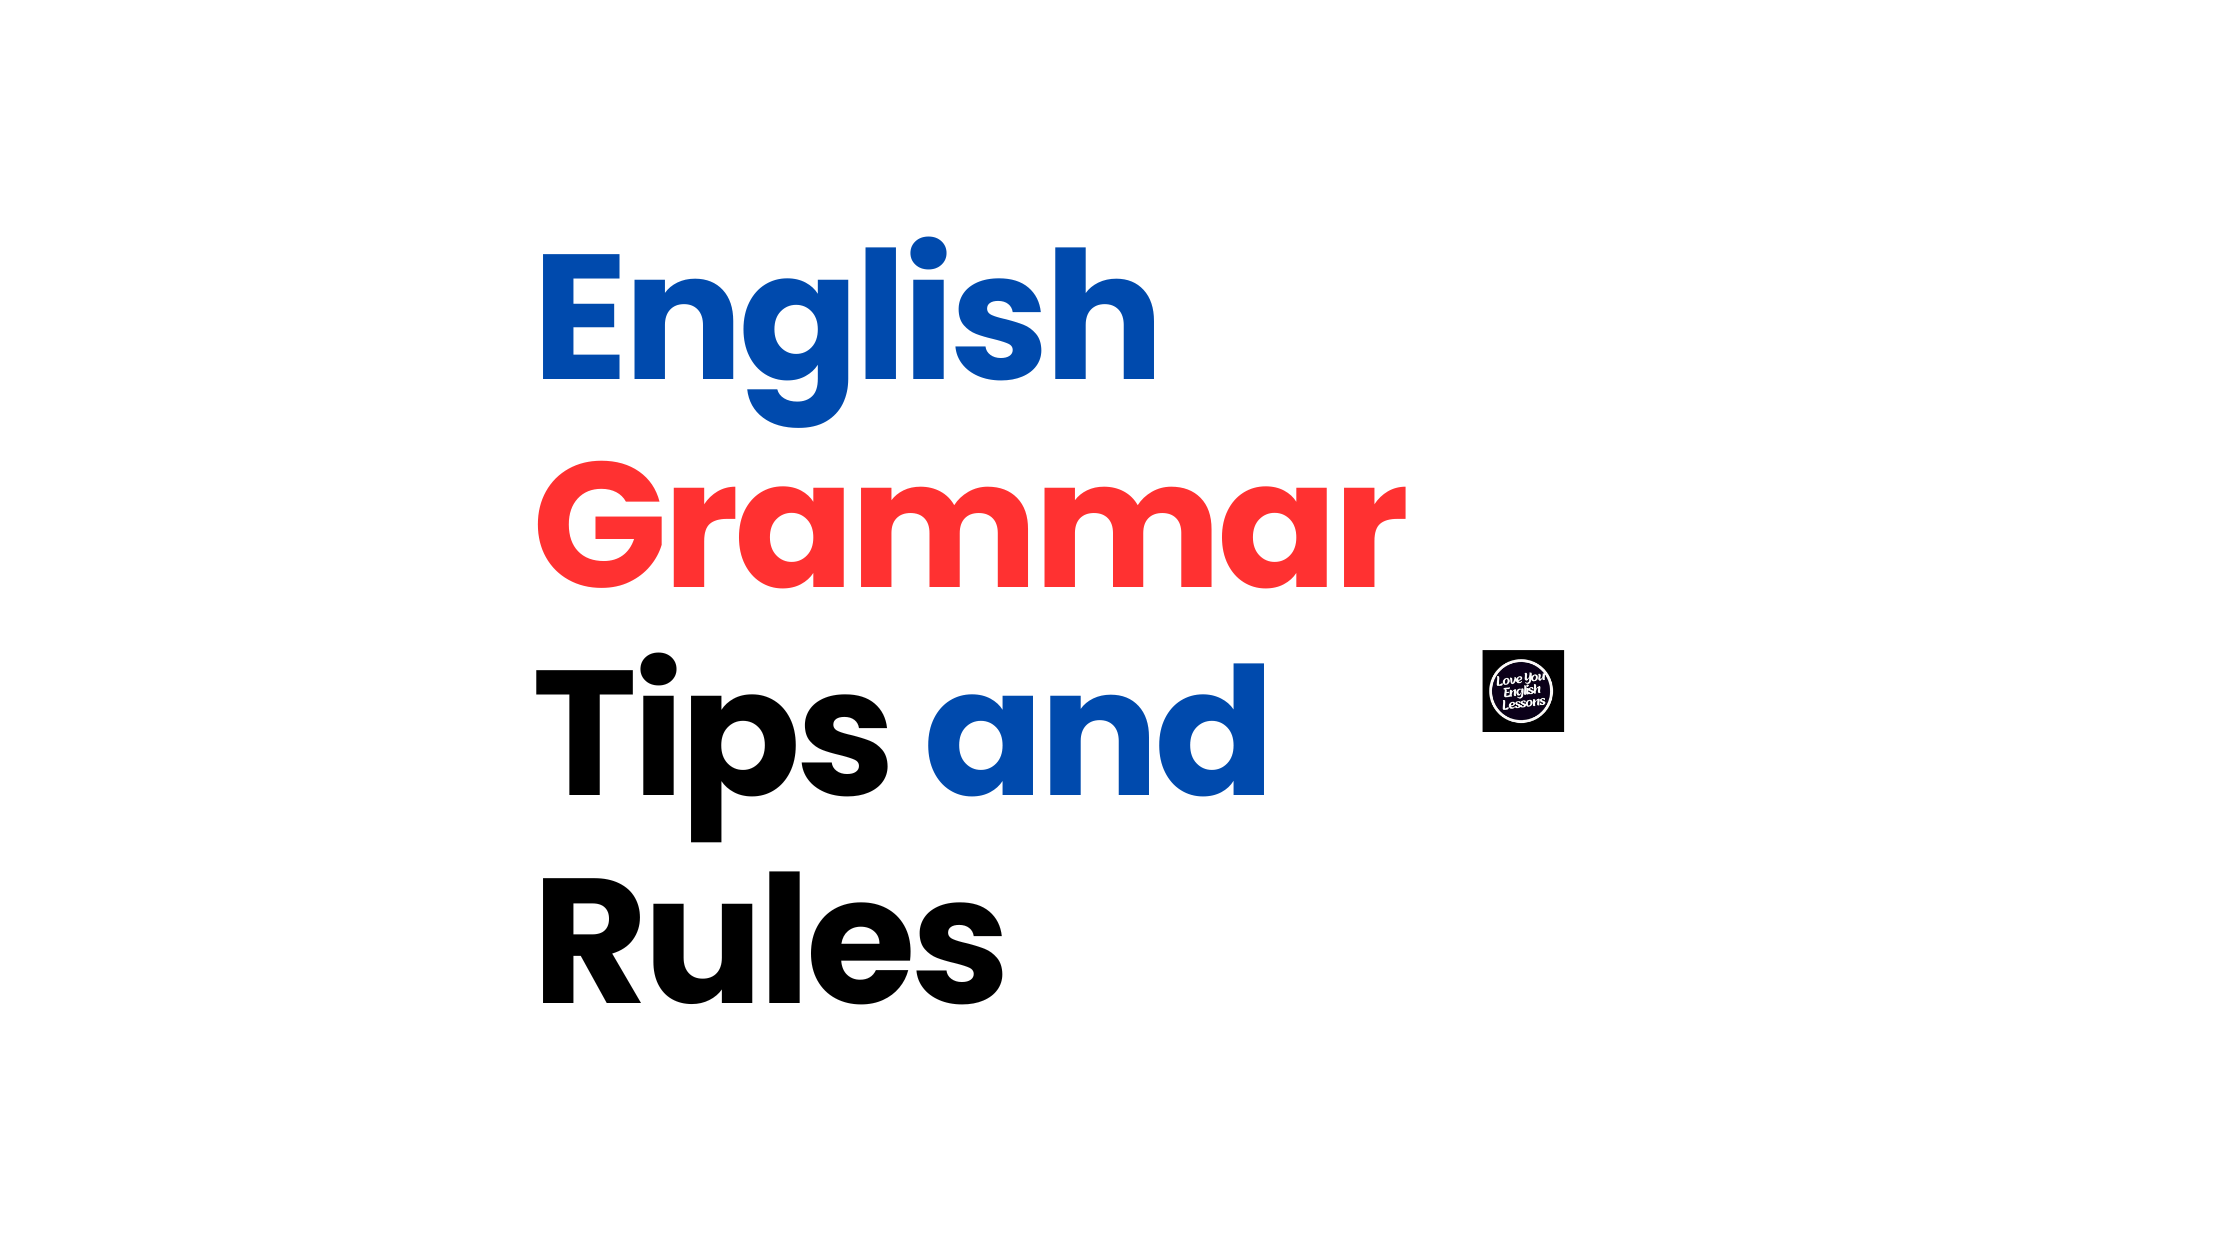 English grammar tips and rules